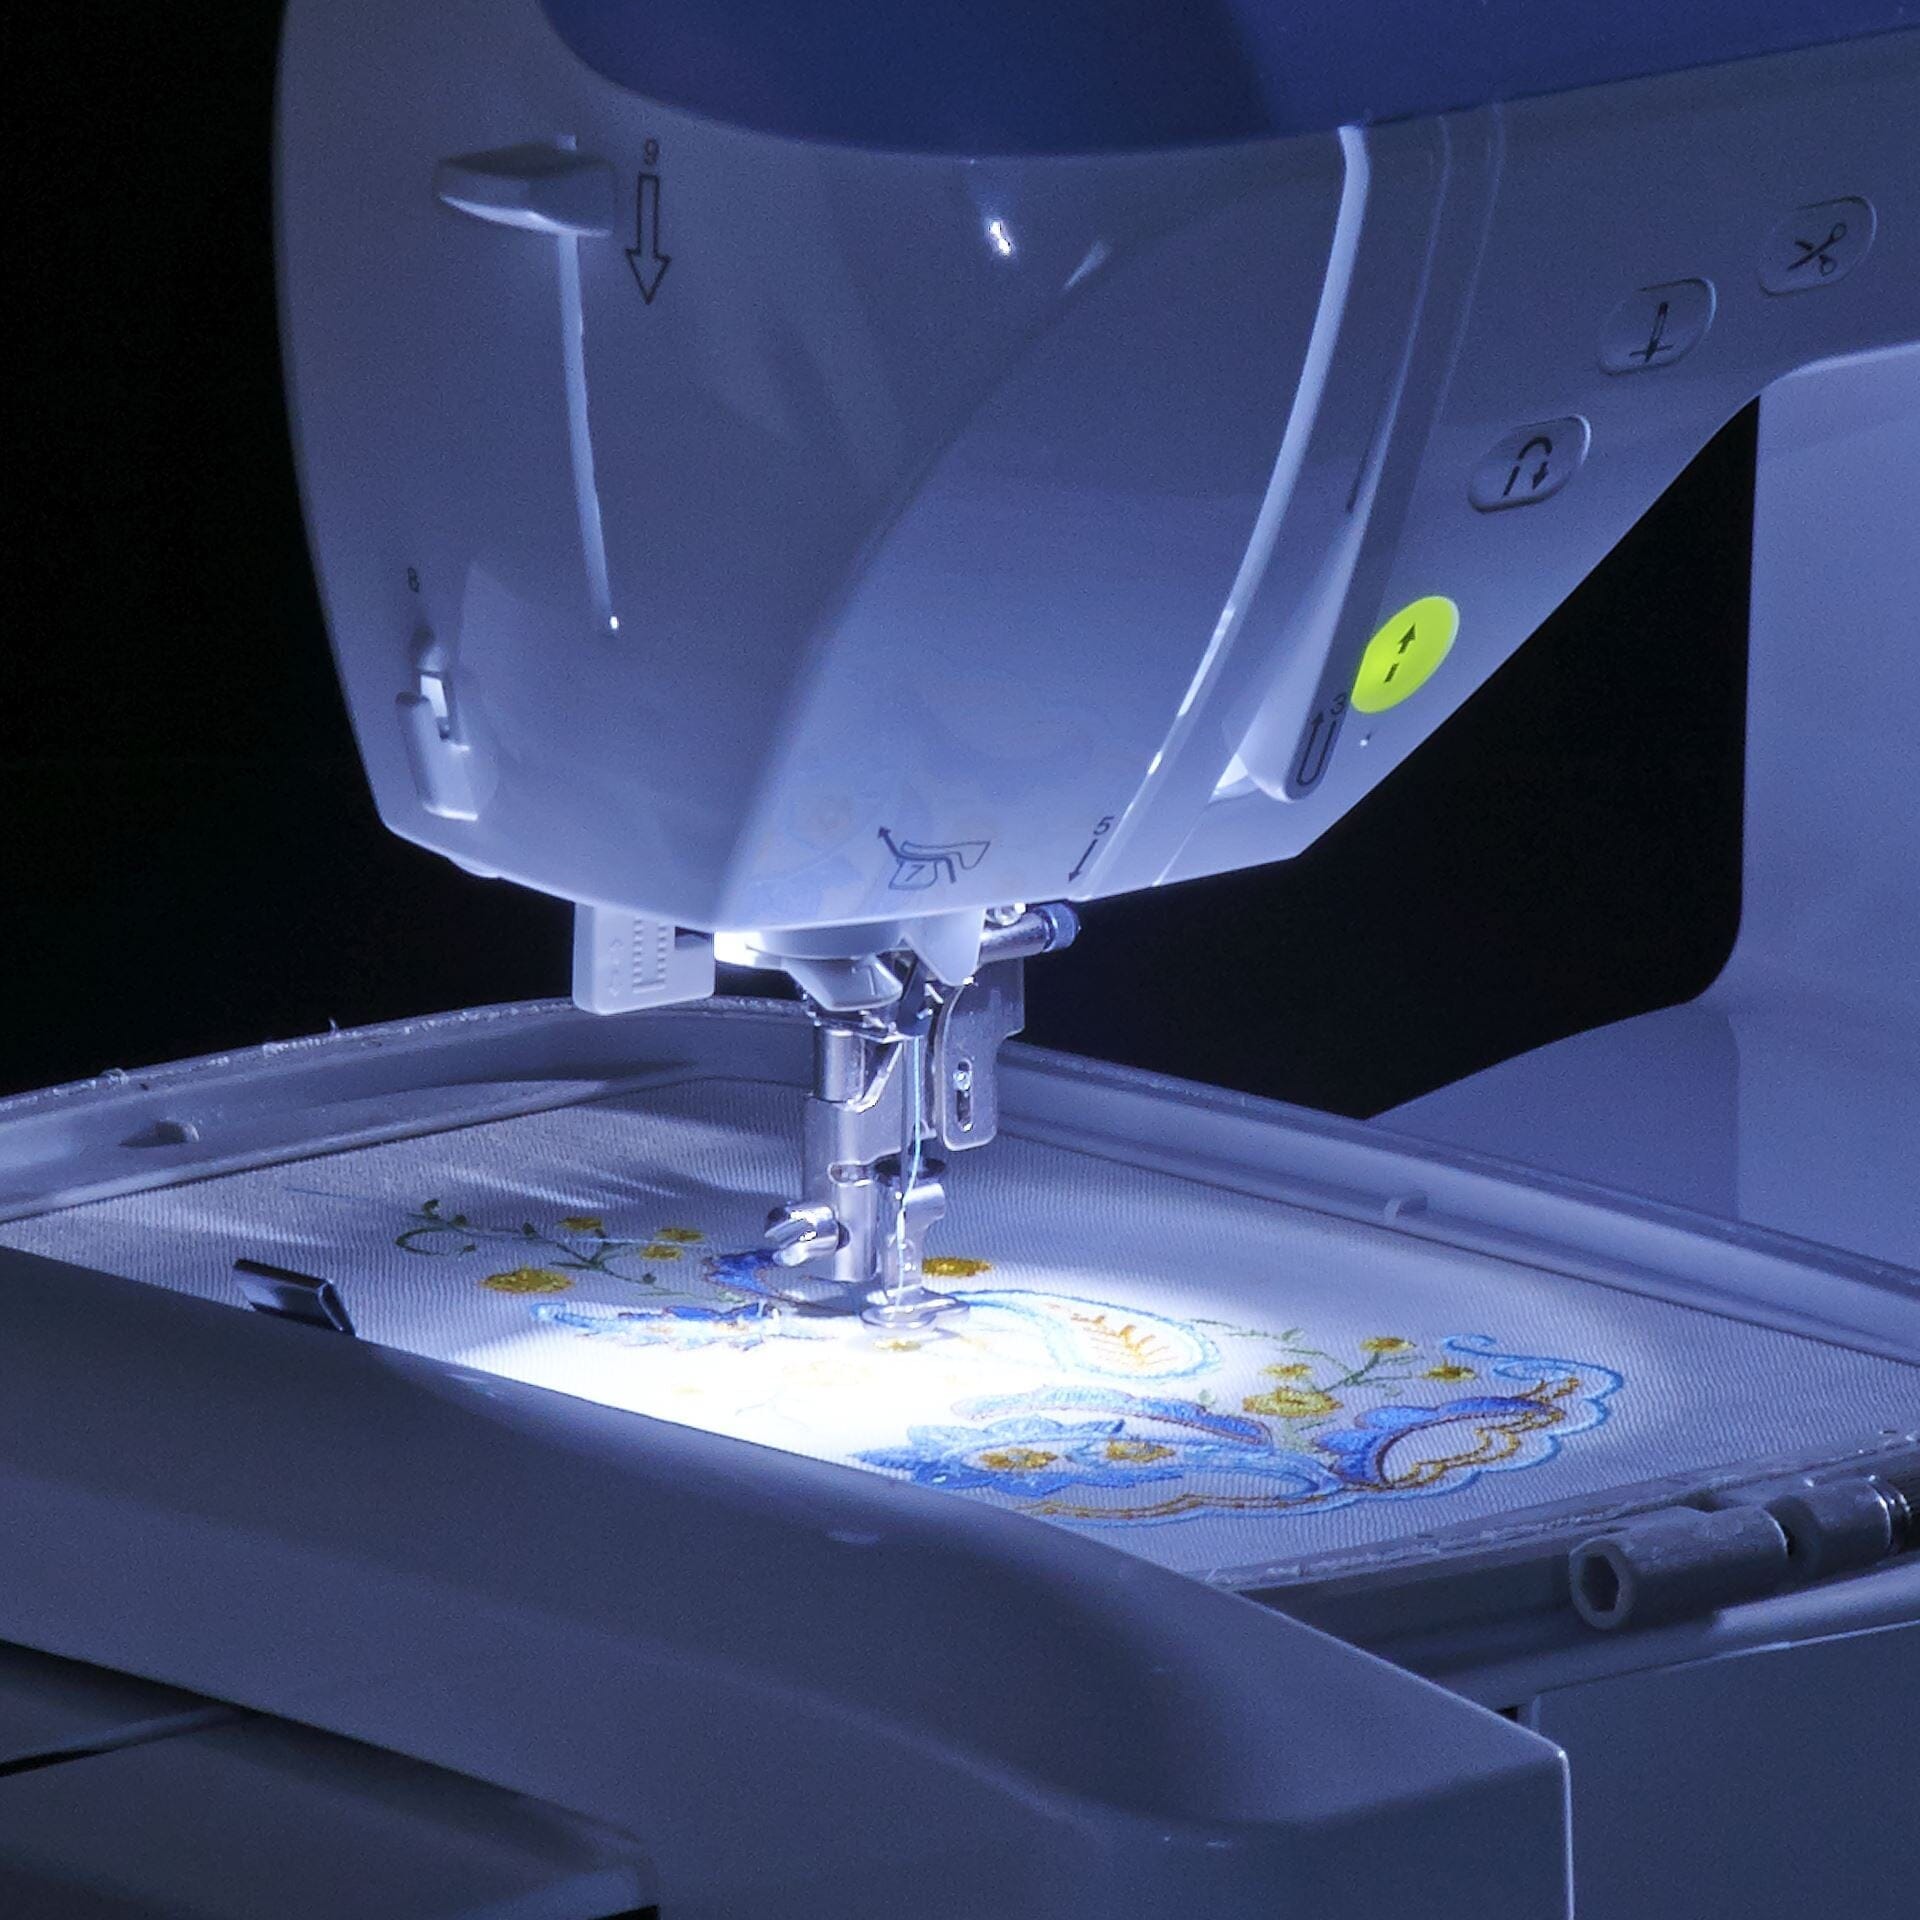 Brother SE1900 Sewing and Embroidery Machine Review: Why We Love